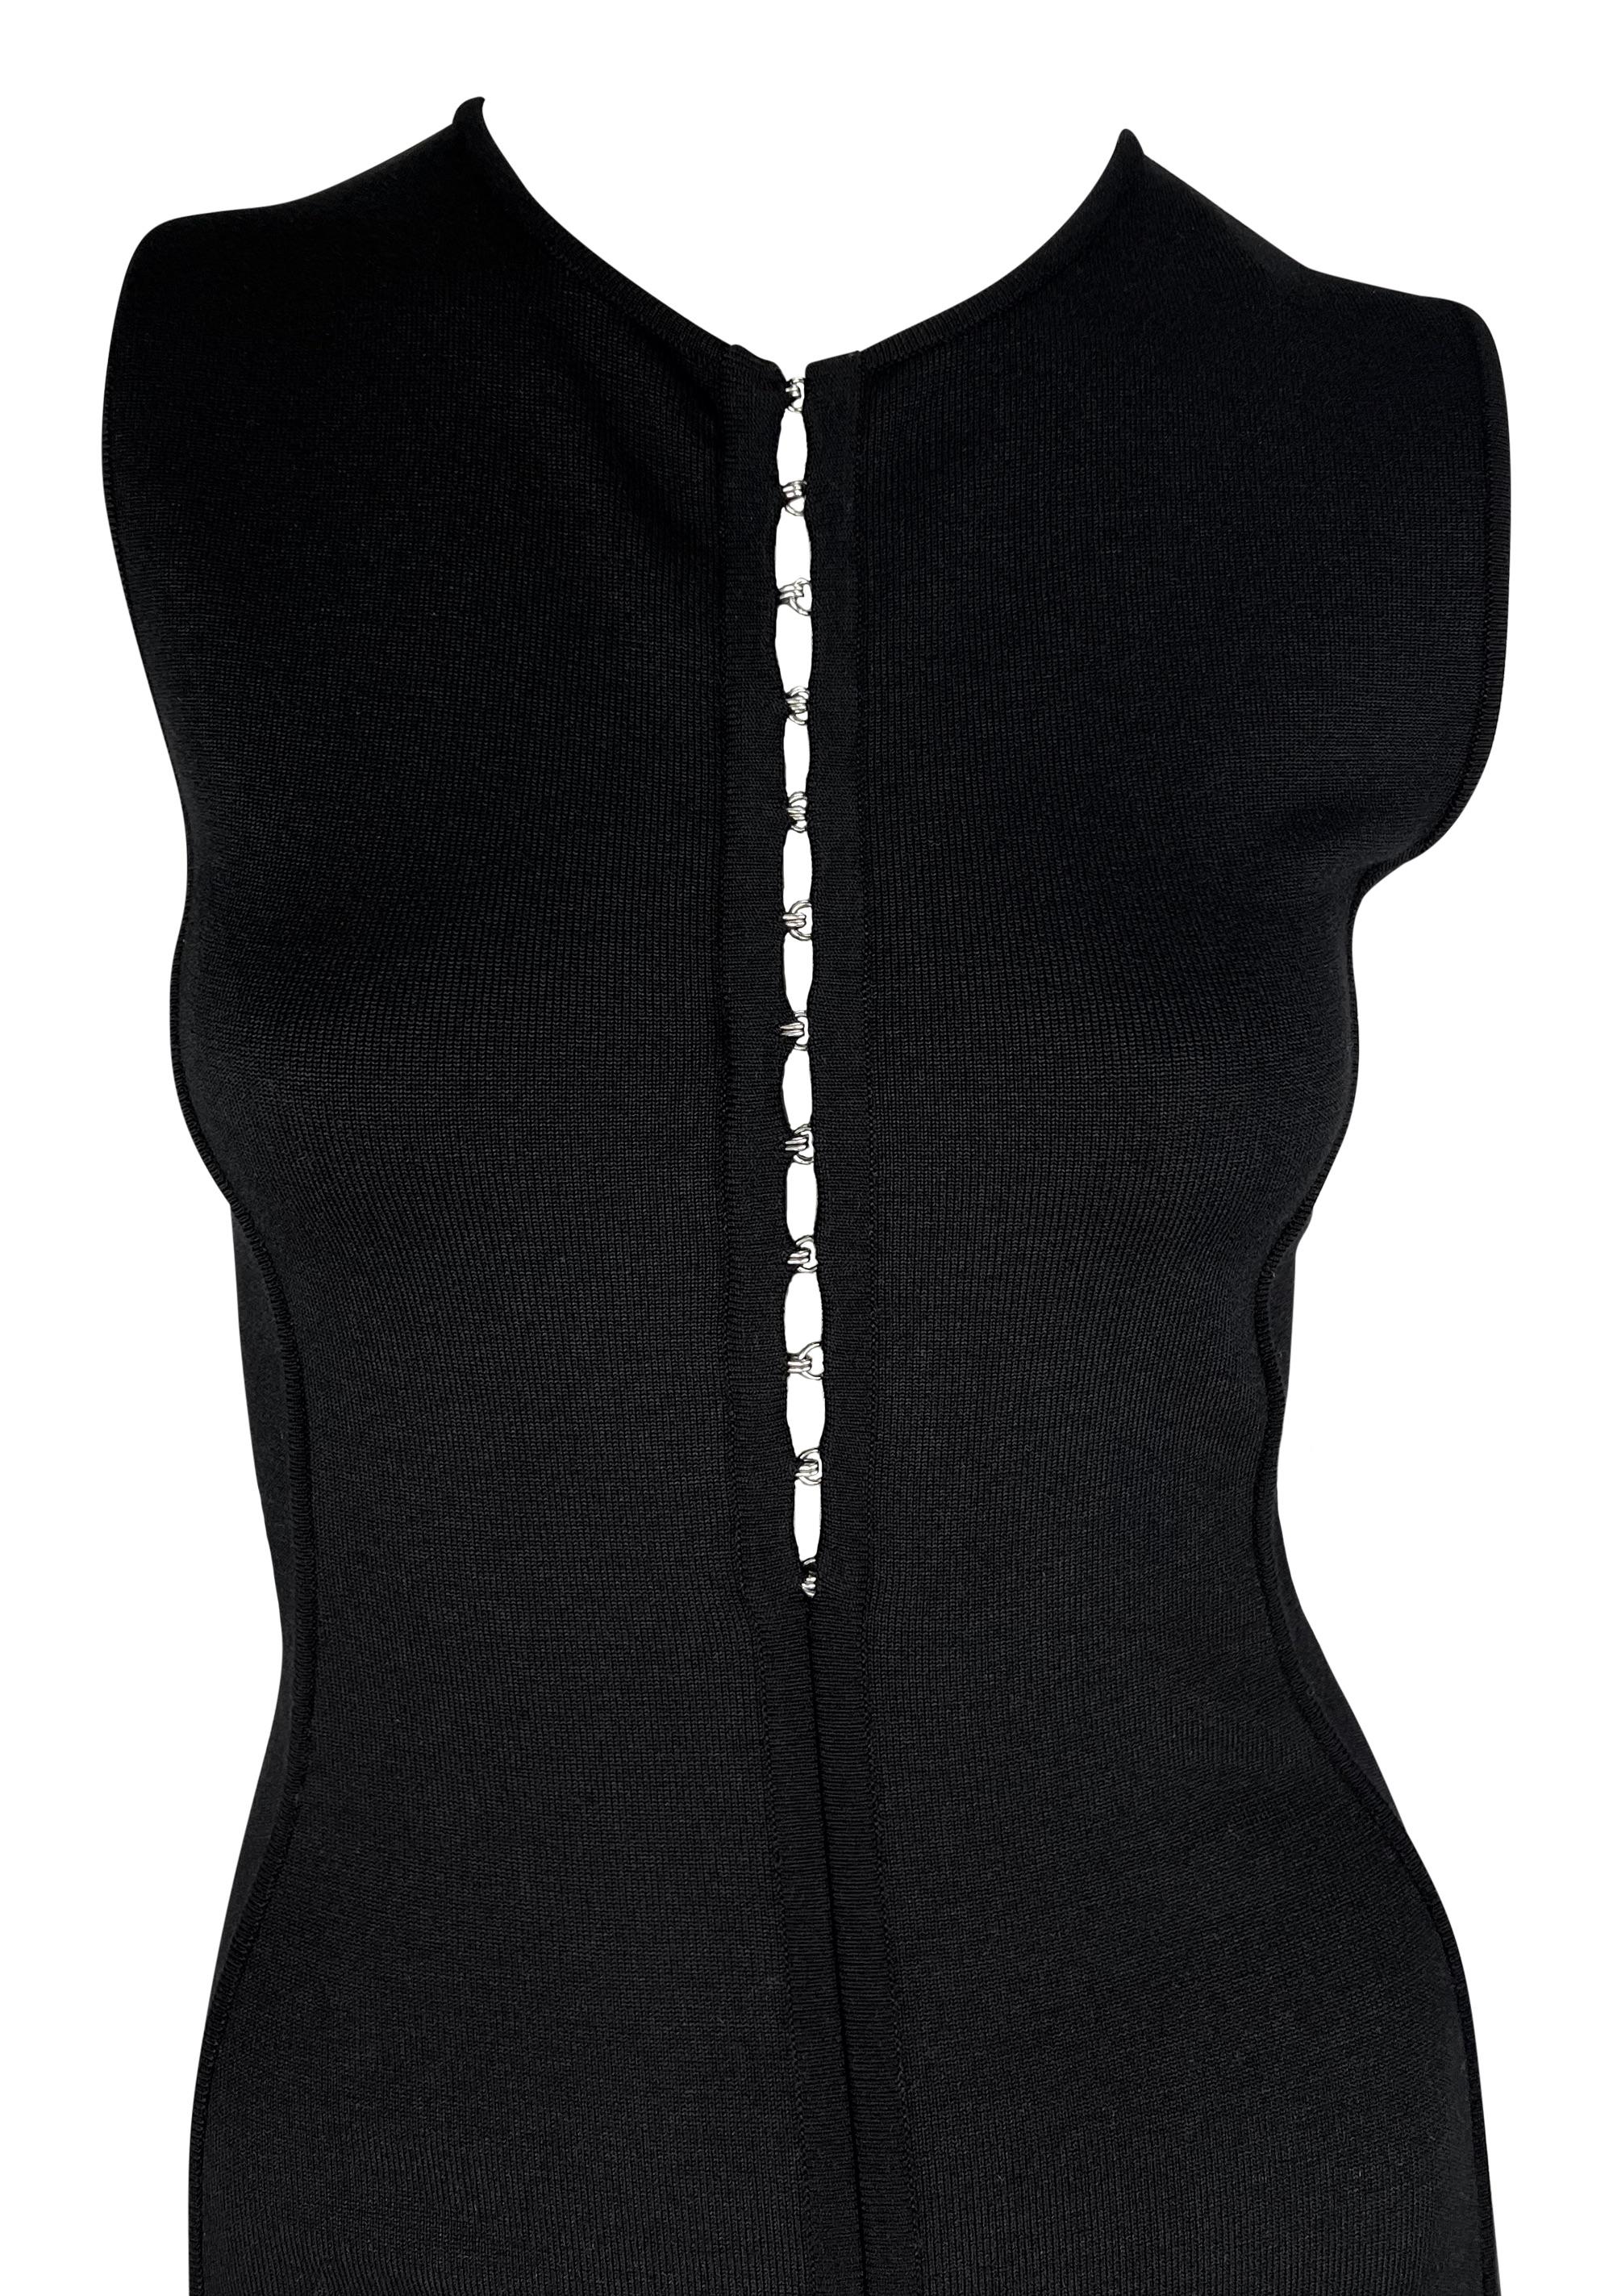 Donatella Versace designed this black knit Gianni Versace bodycon dress for the Spring/Summer 2002 collection. This sleeveless little black dress features a crew neckline and is complete with a silver hook and eye closures running down the front.